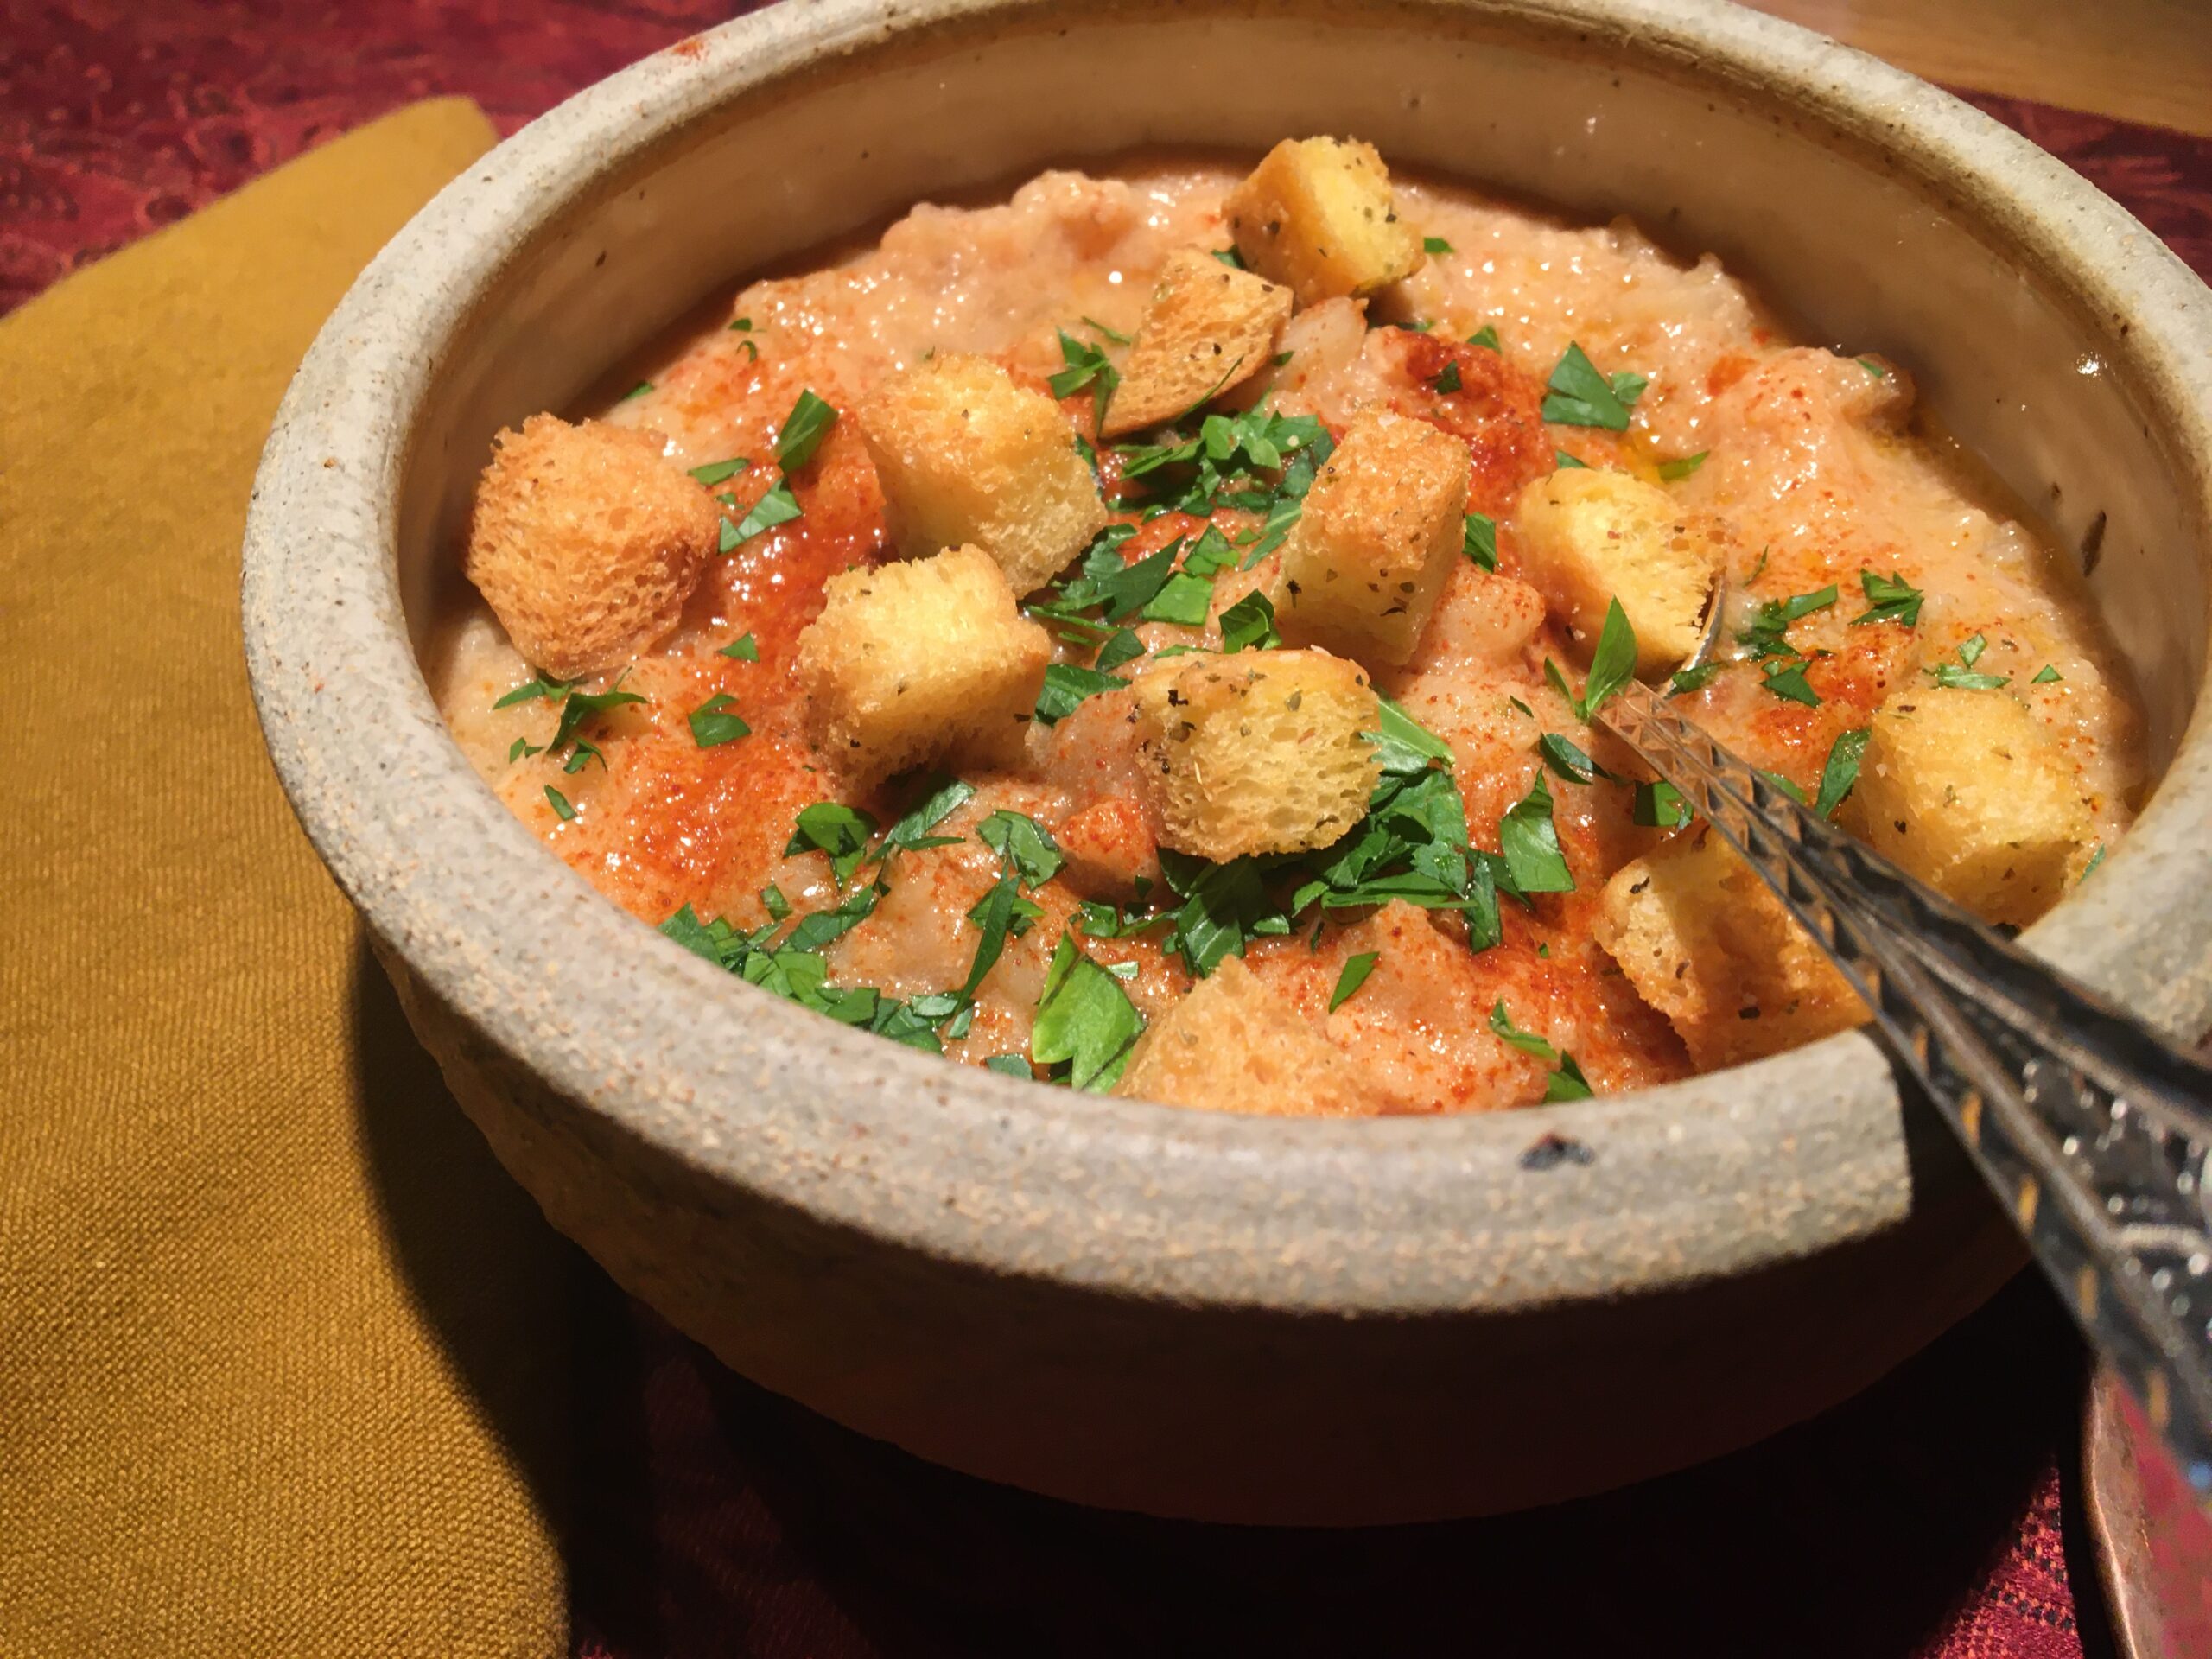 Bowl of fish chowder with parsley, croutons and paprika.